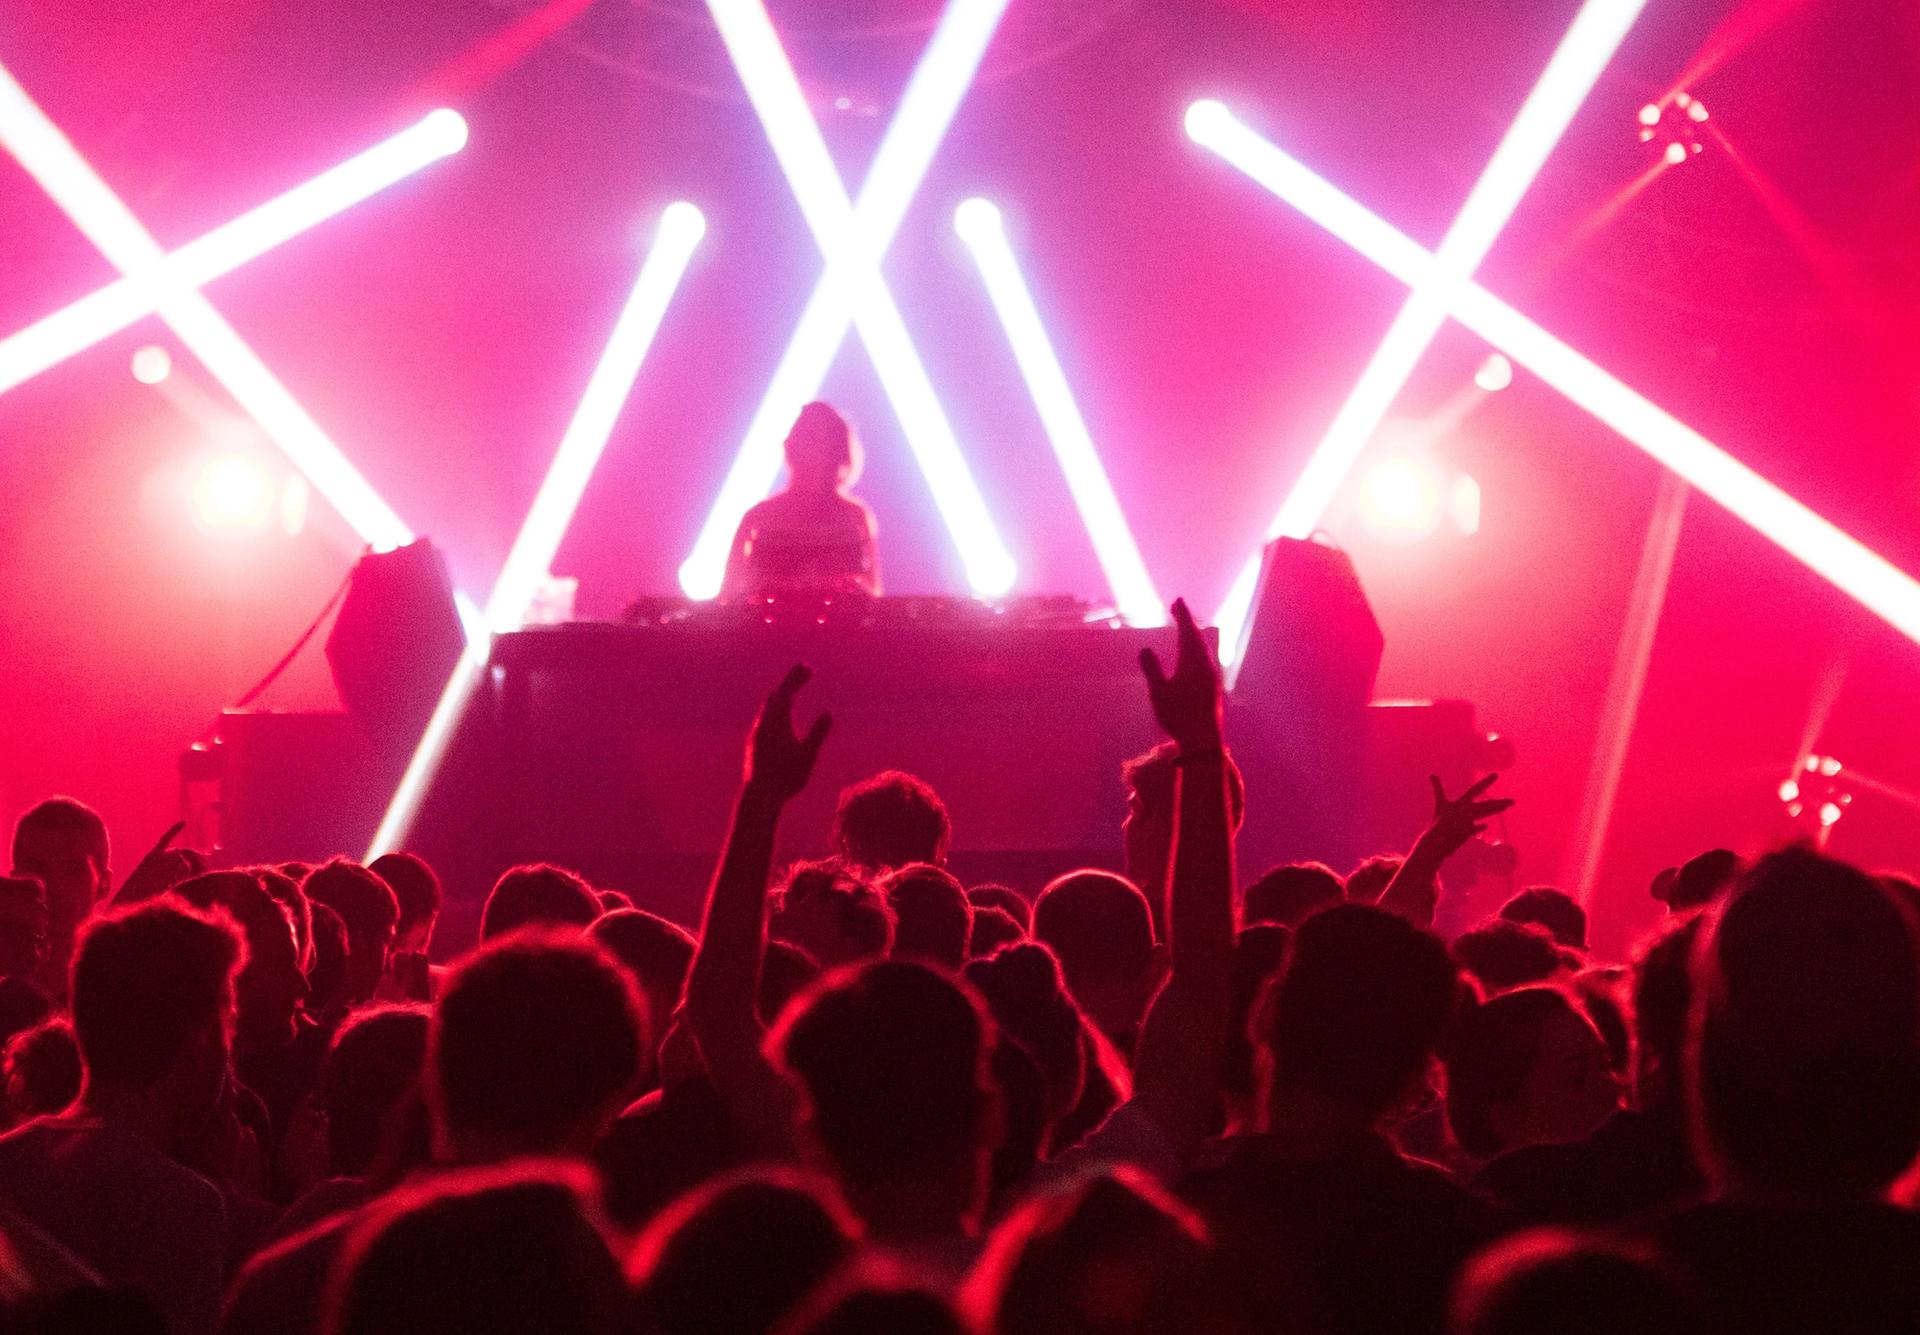 Germany has voted to reclassify its nightclubs as cultural institutions © Antoine Julien / Unsplash